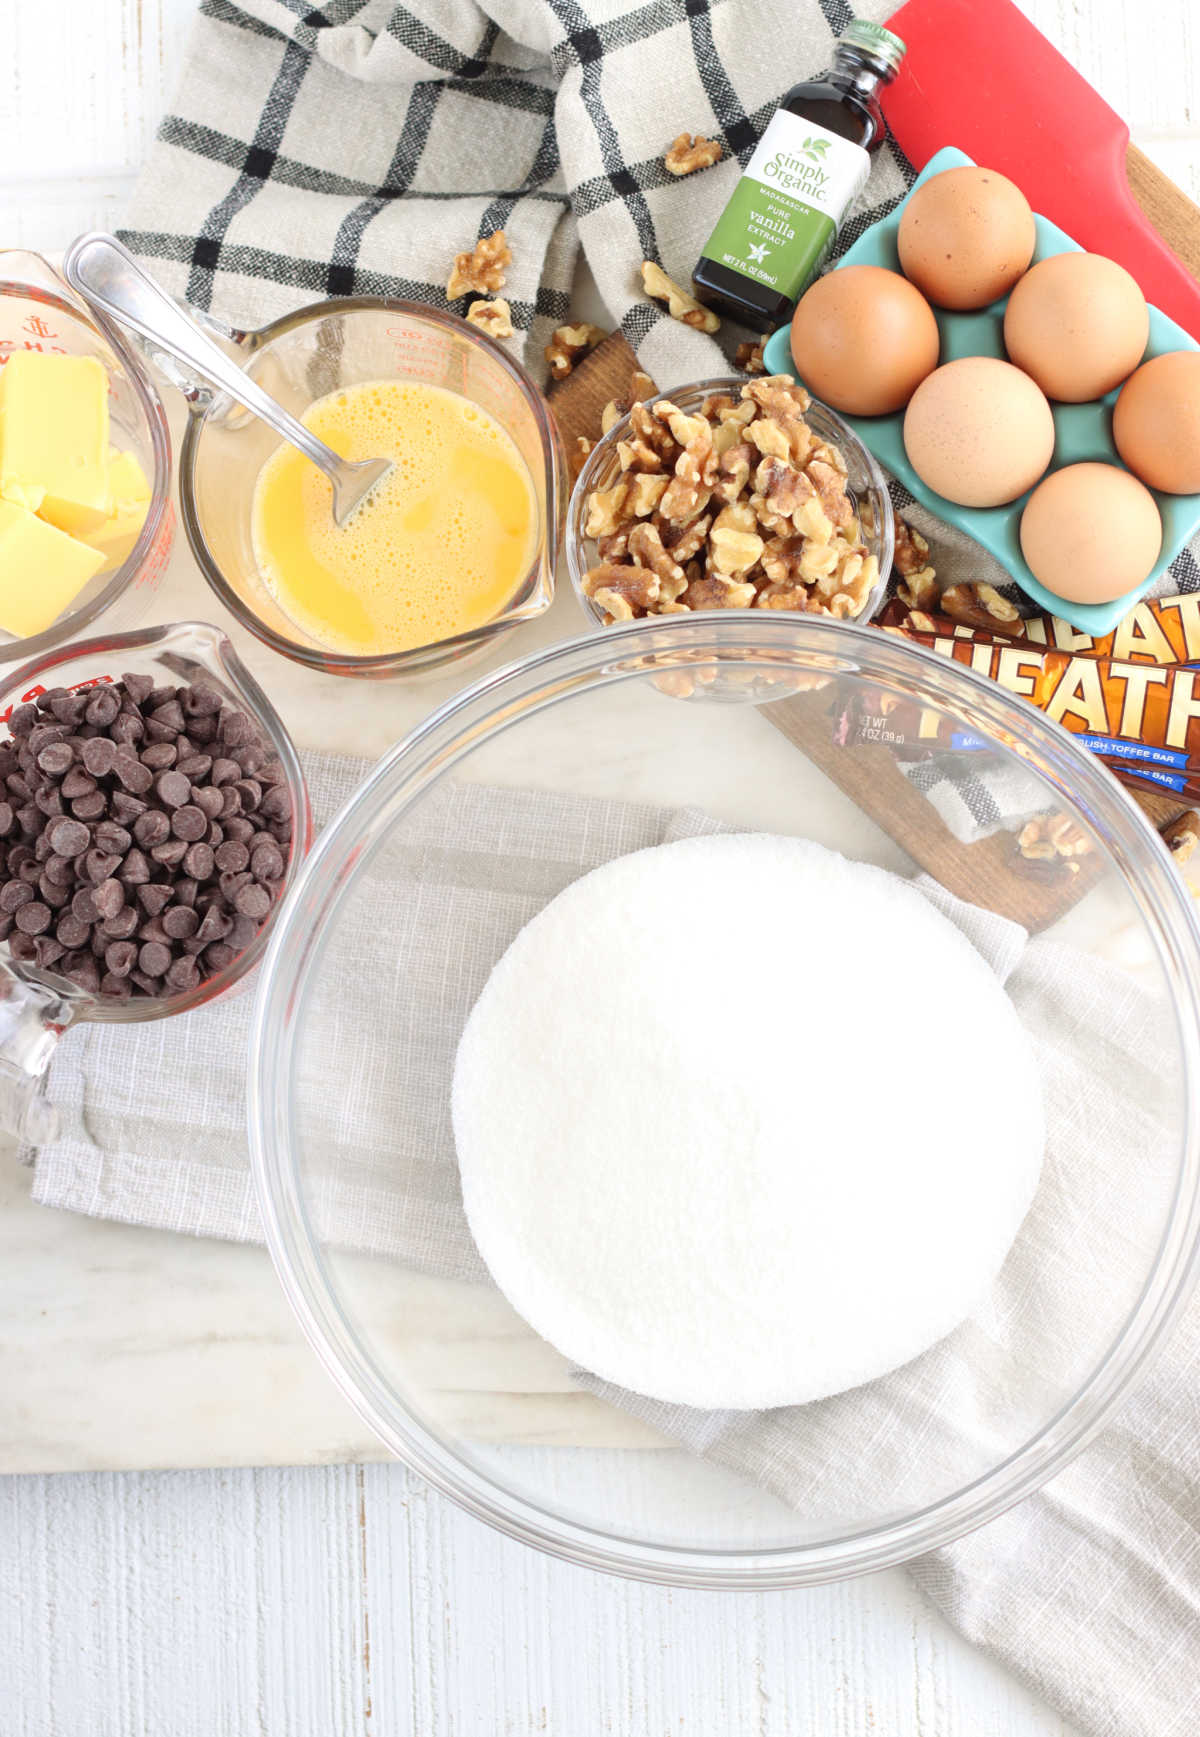 Ingredients for brownies, bowl of sugar, eggs, walnuts, glass measuring cups with chocolate chips and beaten eggs.